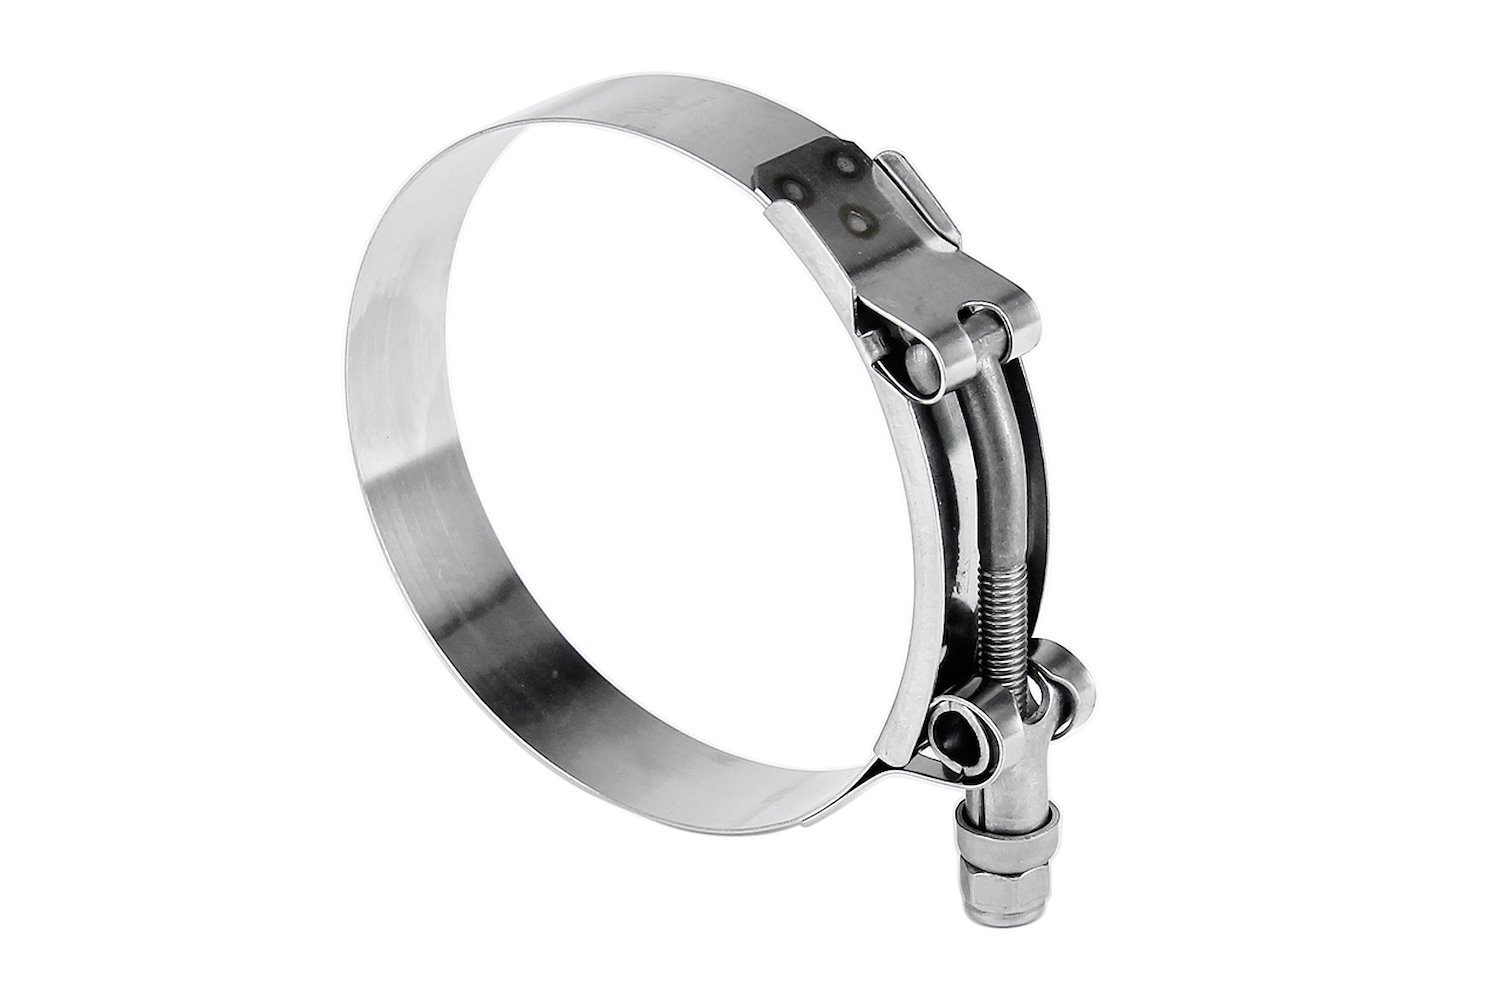 316-SSTC-108-116 100-Percent Marine Grade Stainless Steel T-Bolt Hose Clamp, Size #108, Range: 4.25 in.- 4.57 in.